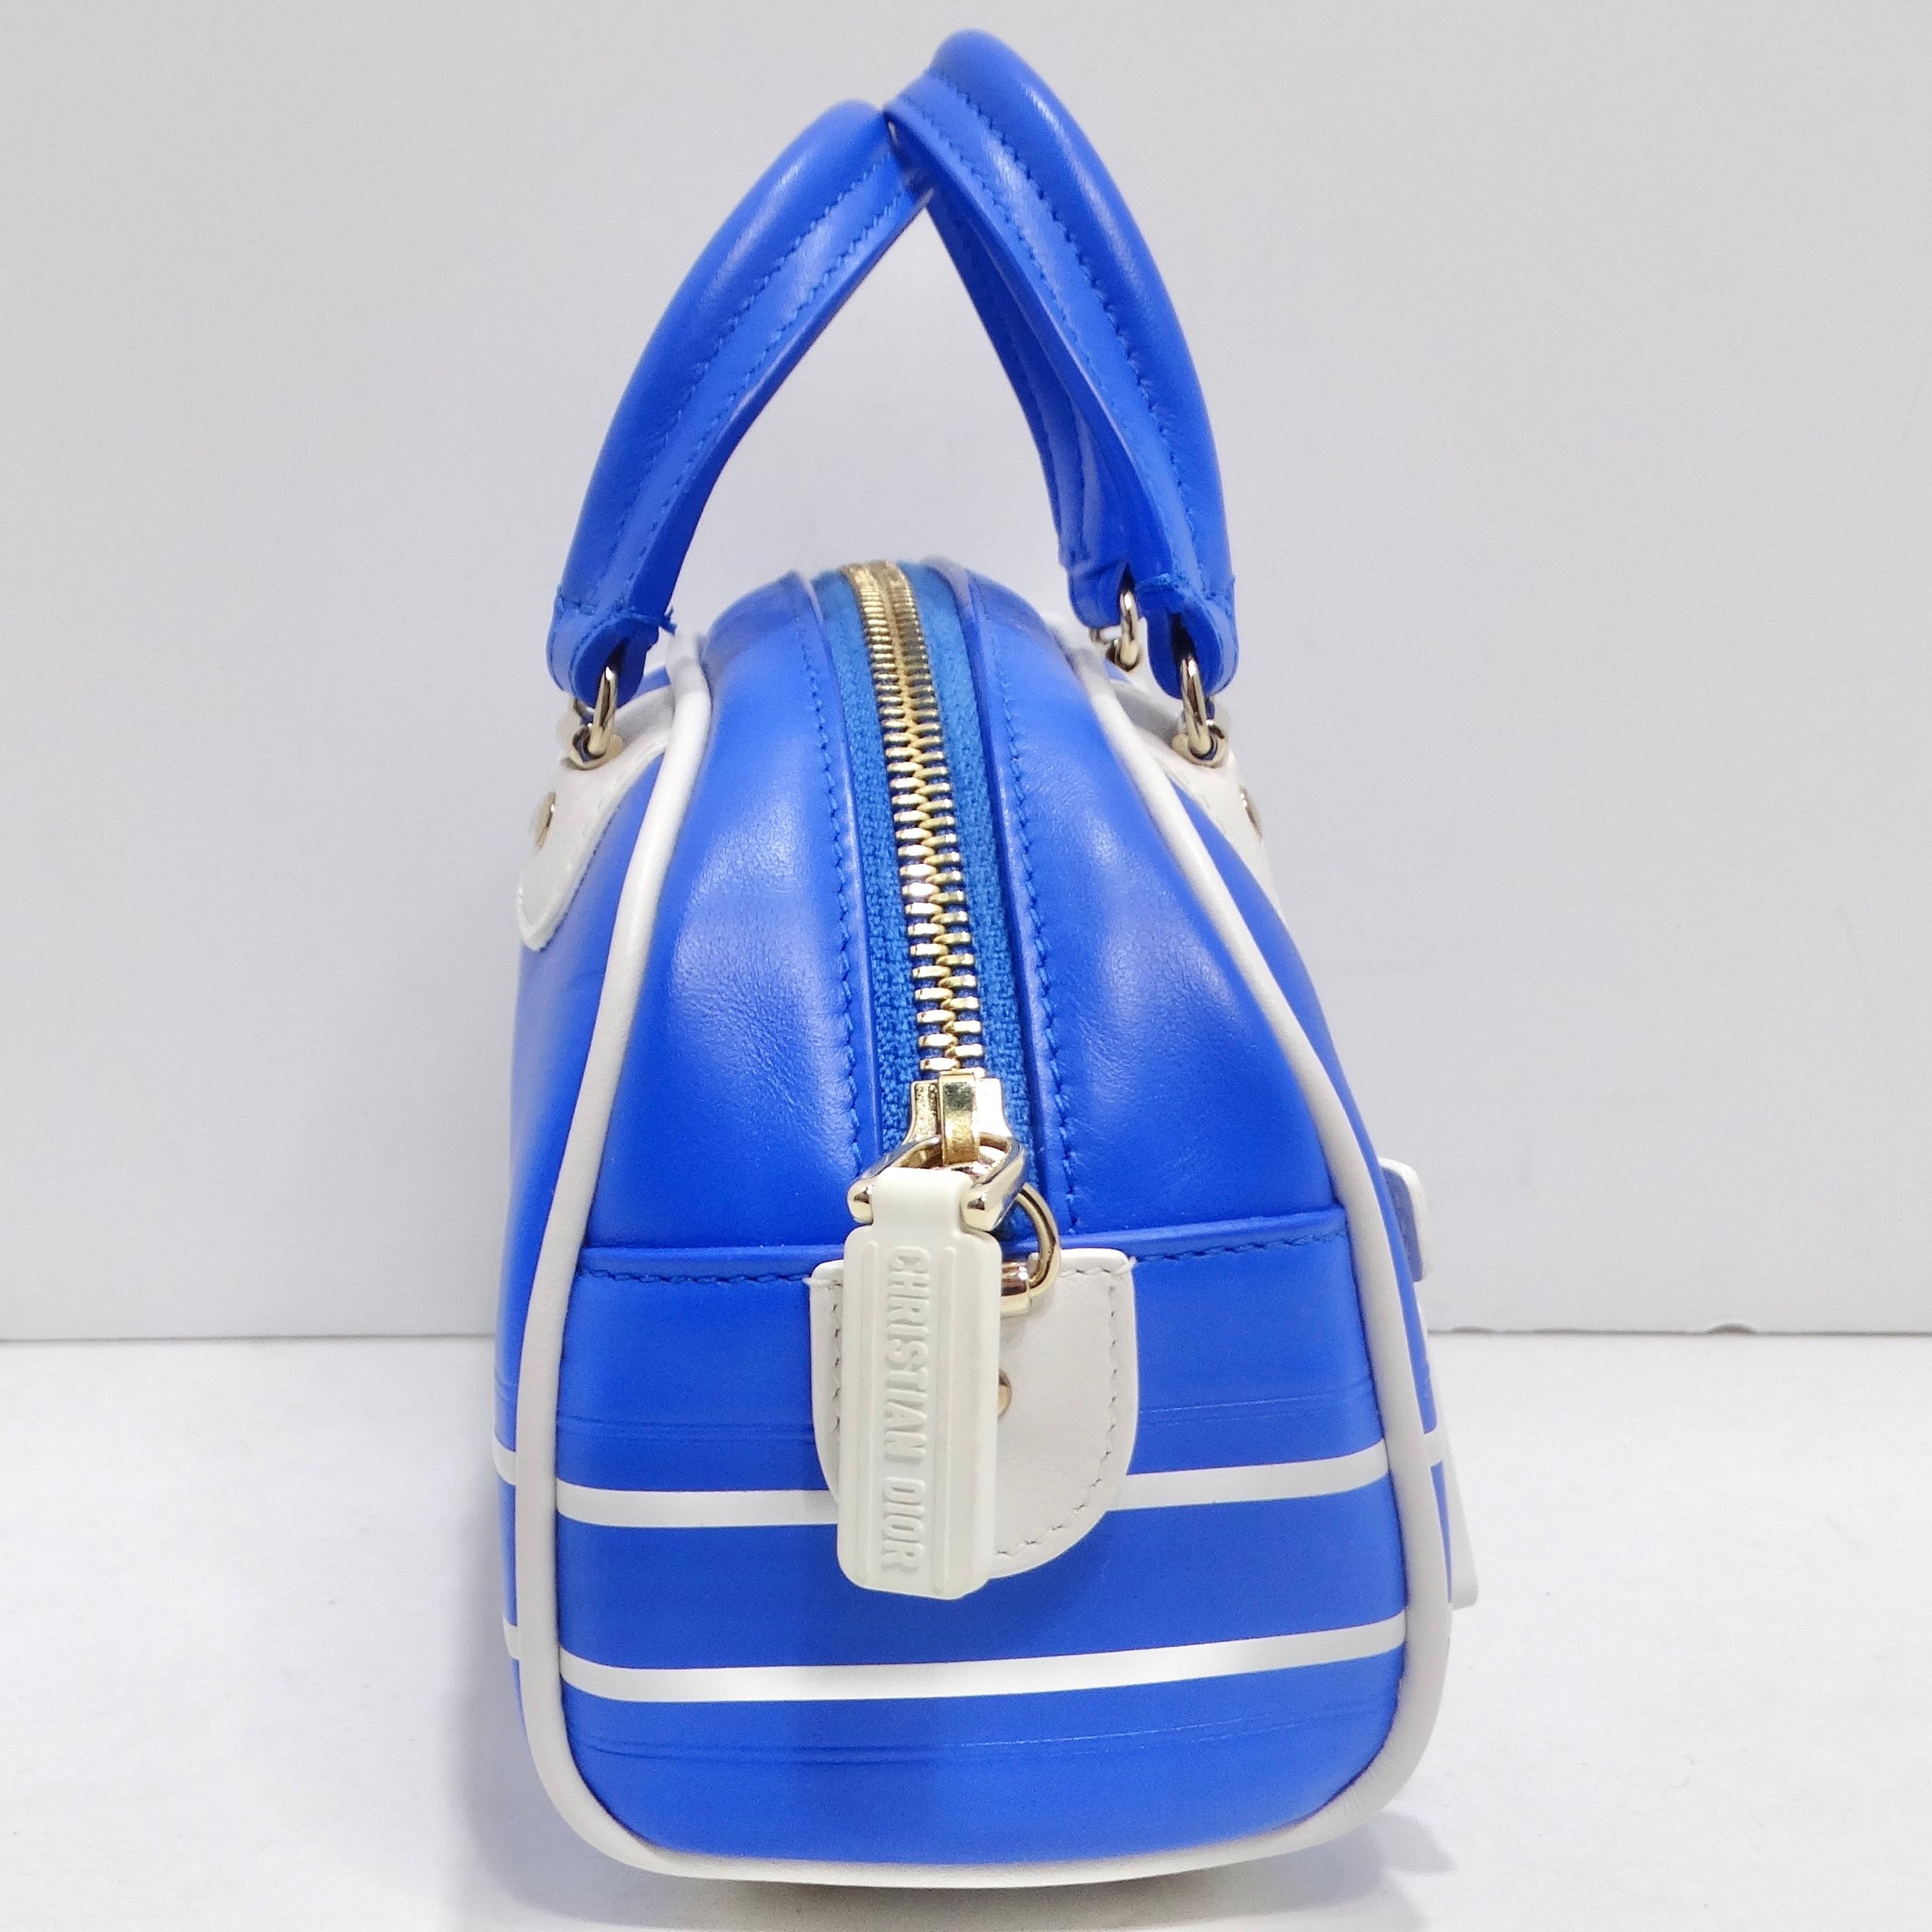 Christian Dior Micro Vibe Zip Bowling Bag Blue Leather In Excellent Condition For Sale In Scottsdale, AZ